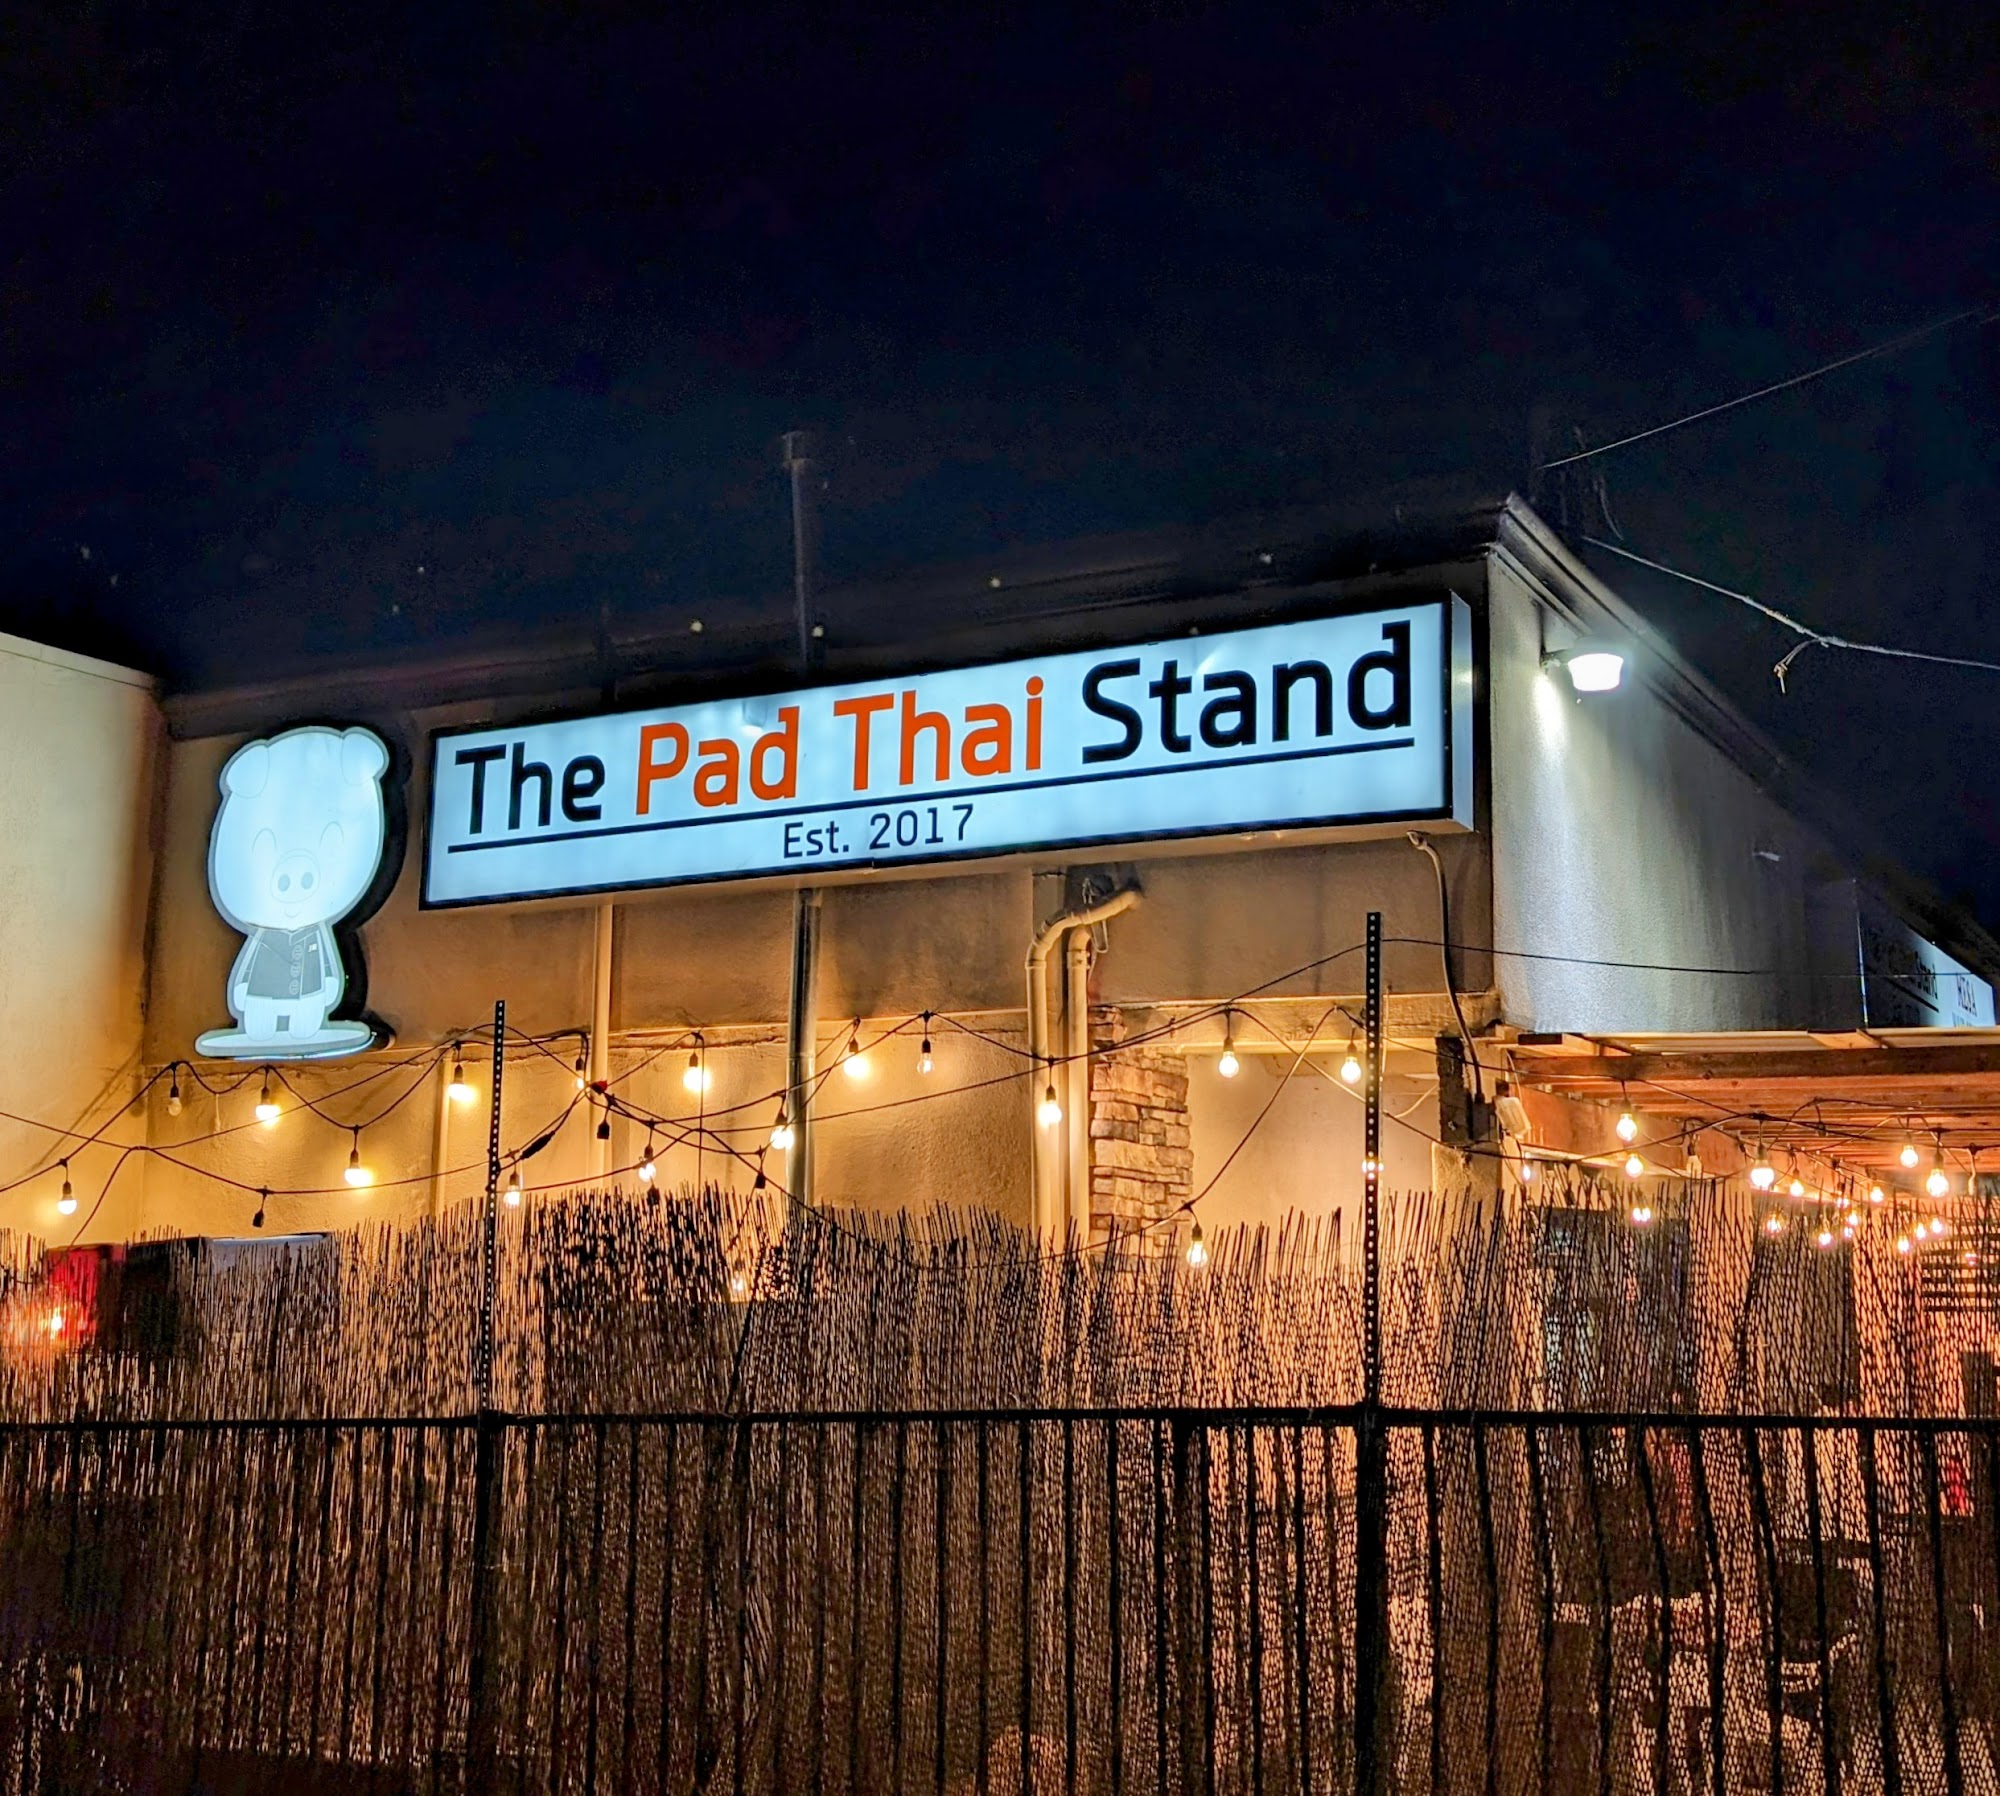 The Pad Thai Stand